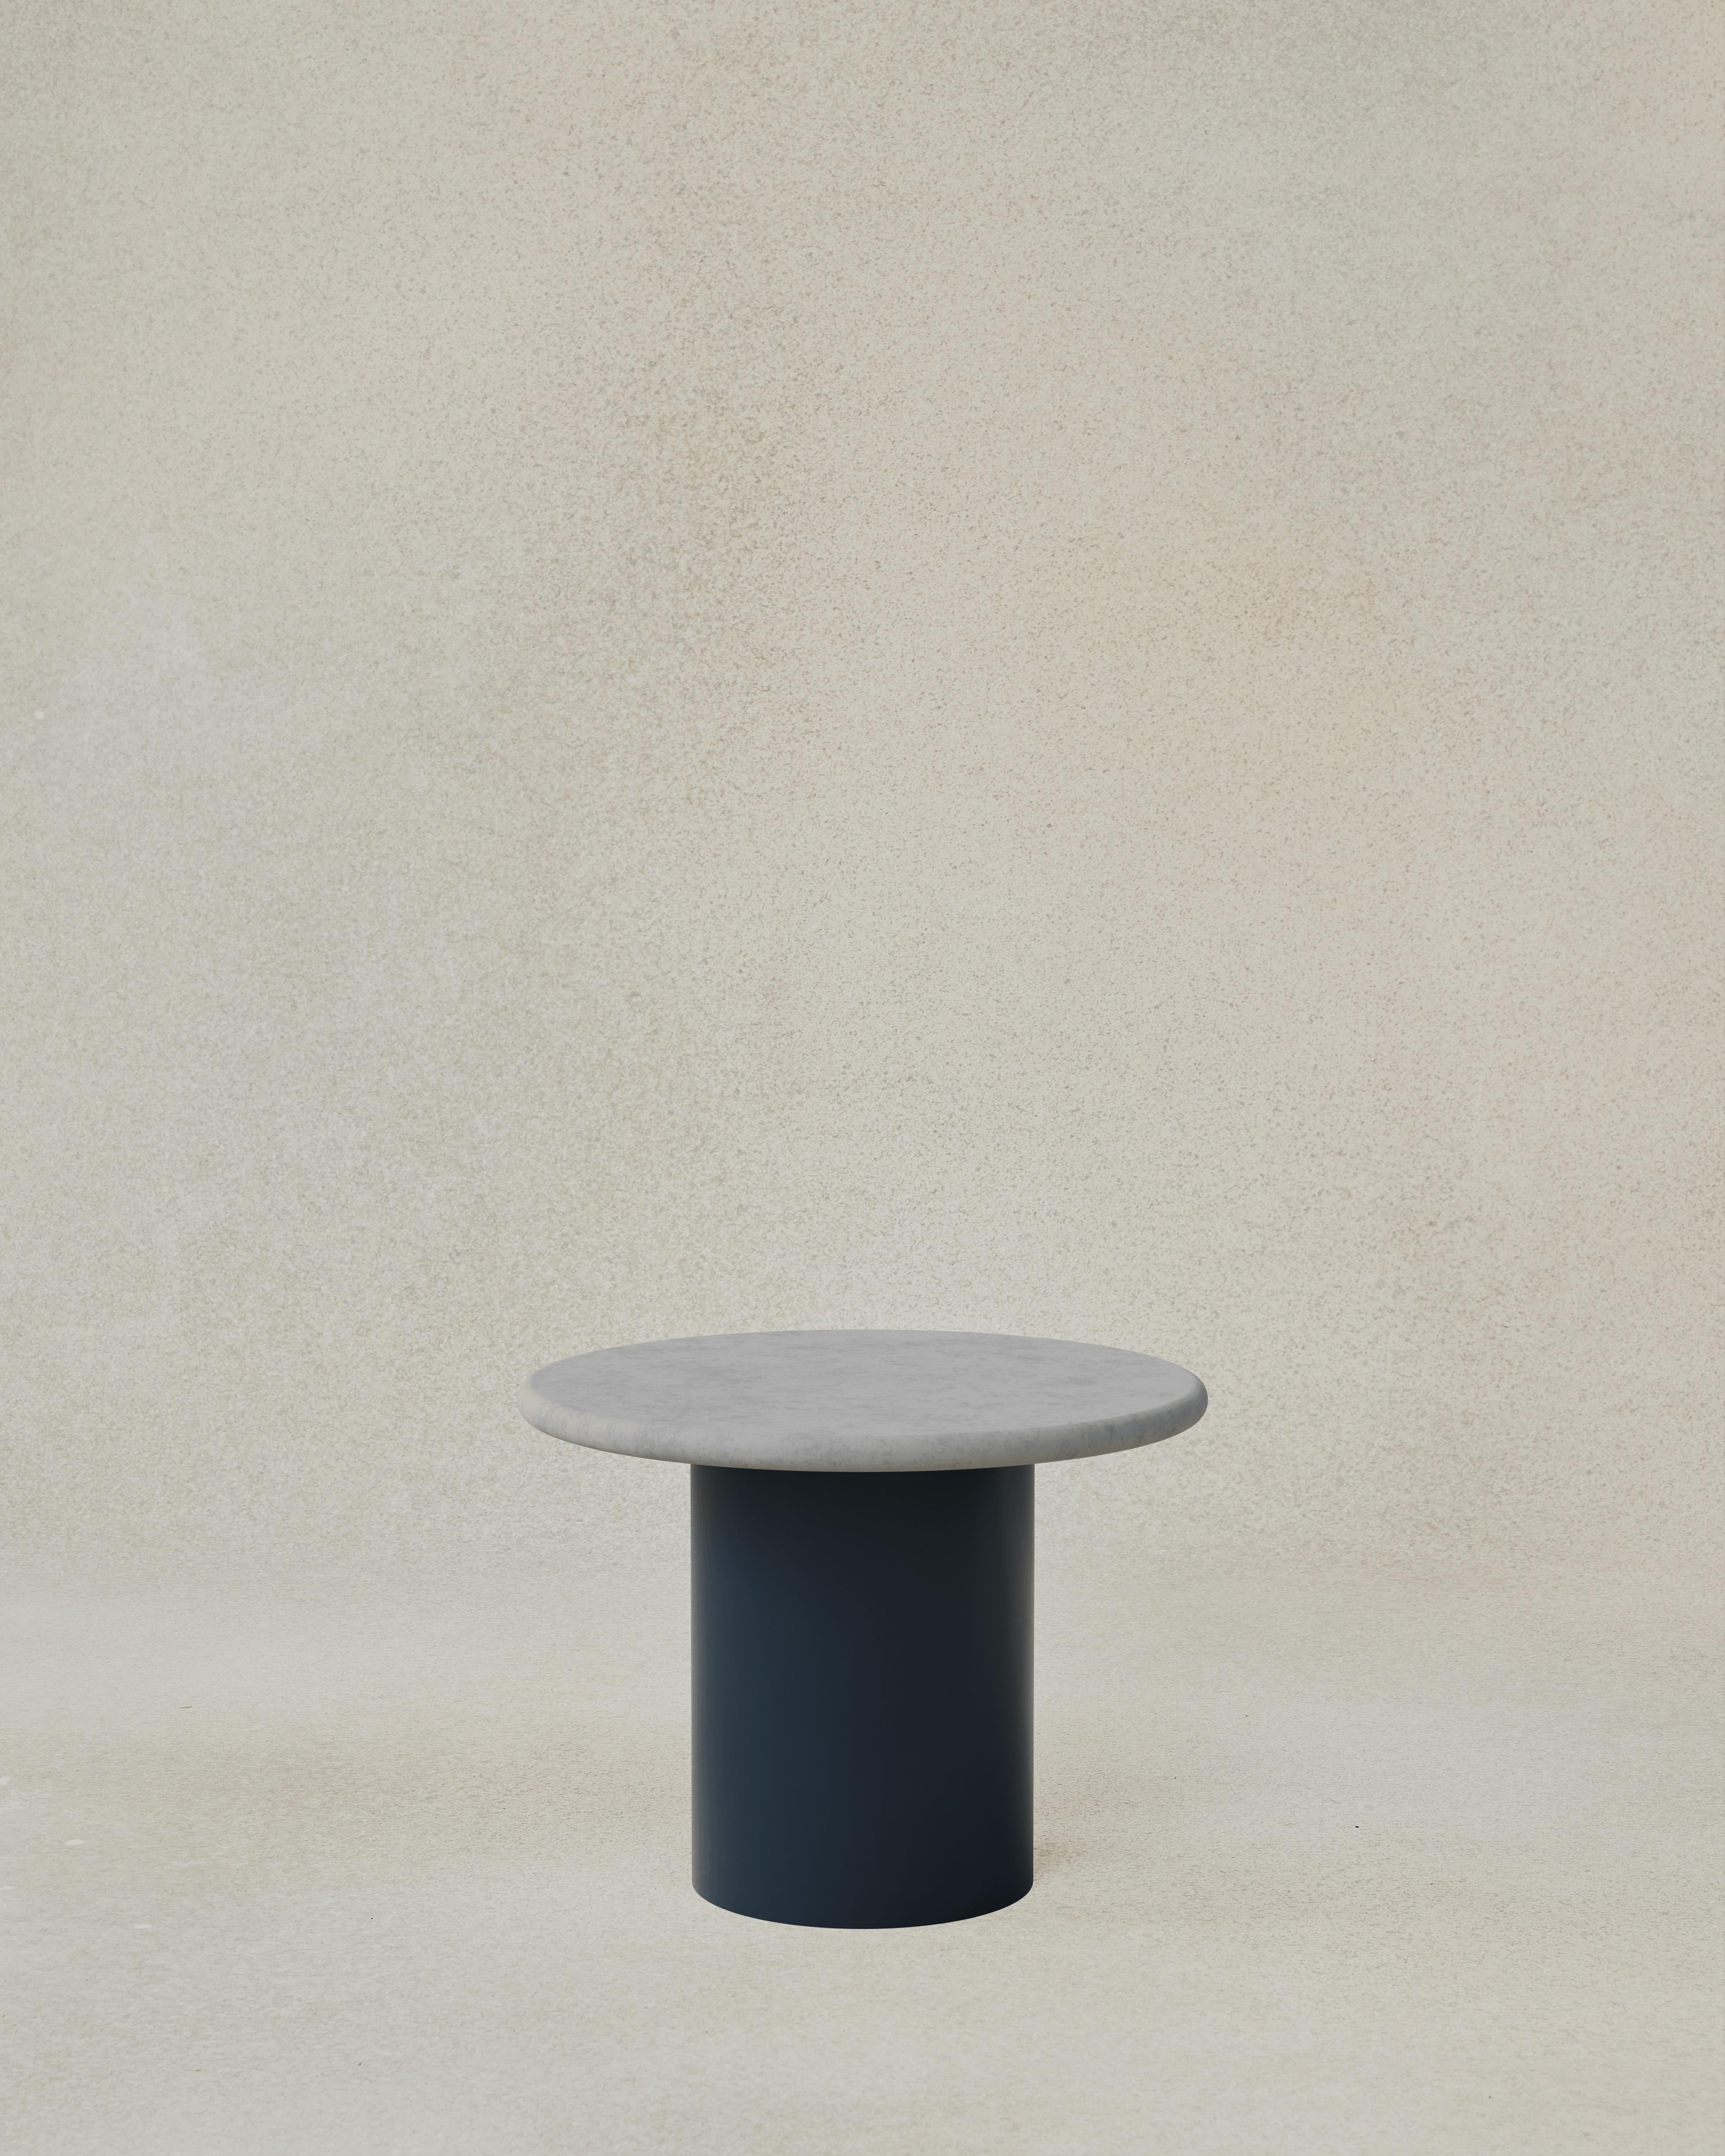 The Raindrop 500 is the largest side table we offer in the series can be paired with a 300 or 1000, or both! Now available in a range of finishes to suit any interior or style. The raindrops nestle together to form a cascading series of tables in